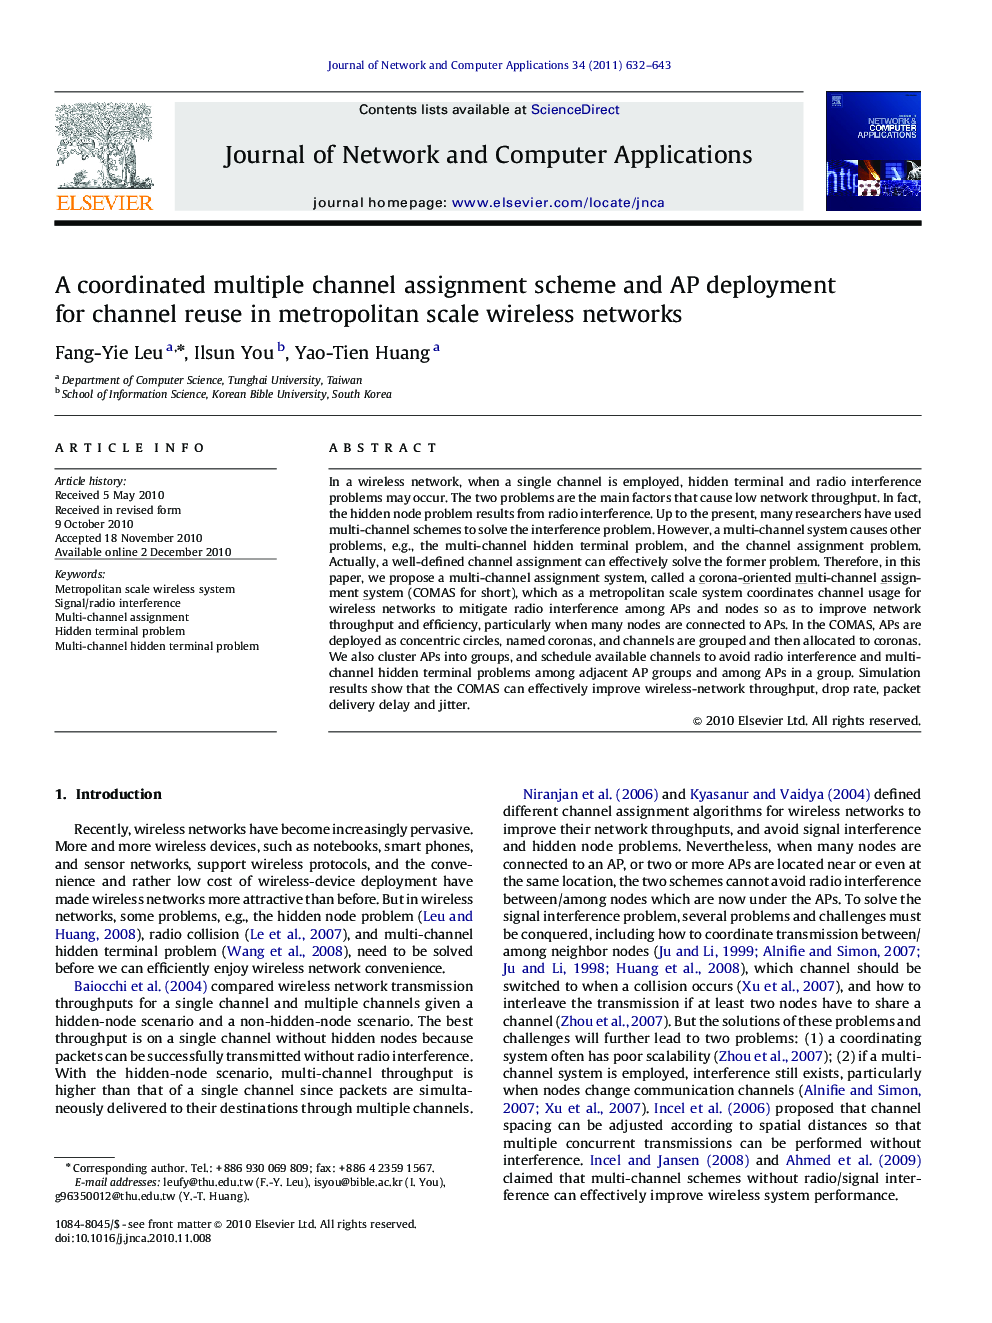 A coordinated multiple channel assignment scheme and AP deployment for channel reuse in metropolitan scale wireless networks